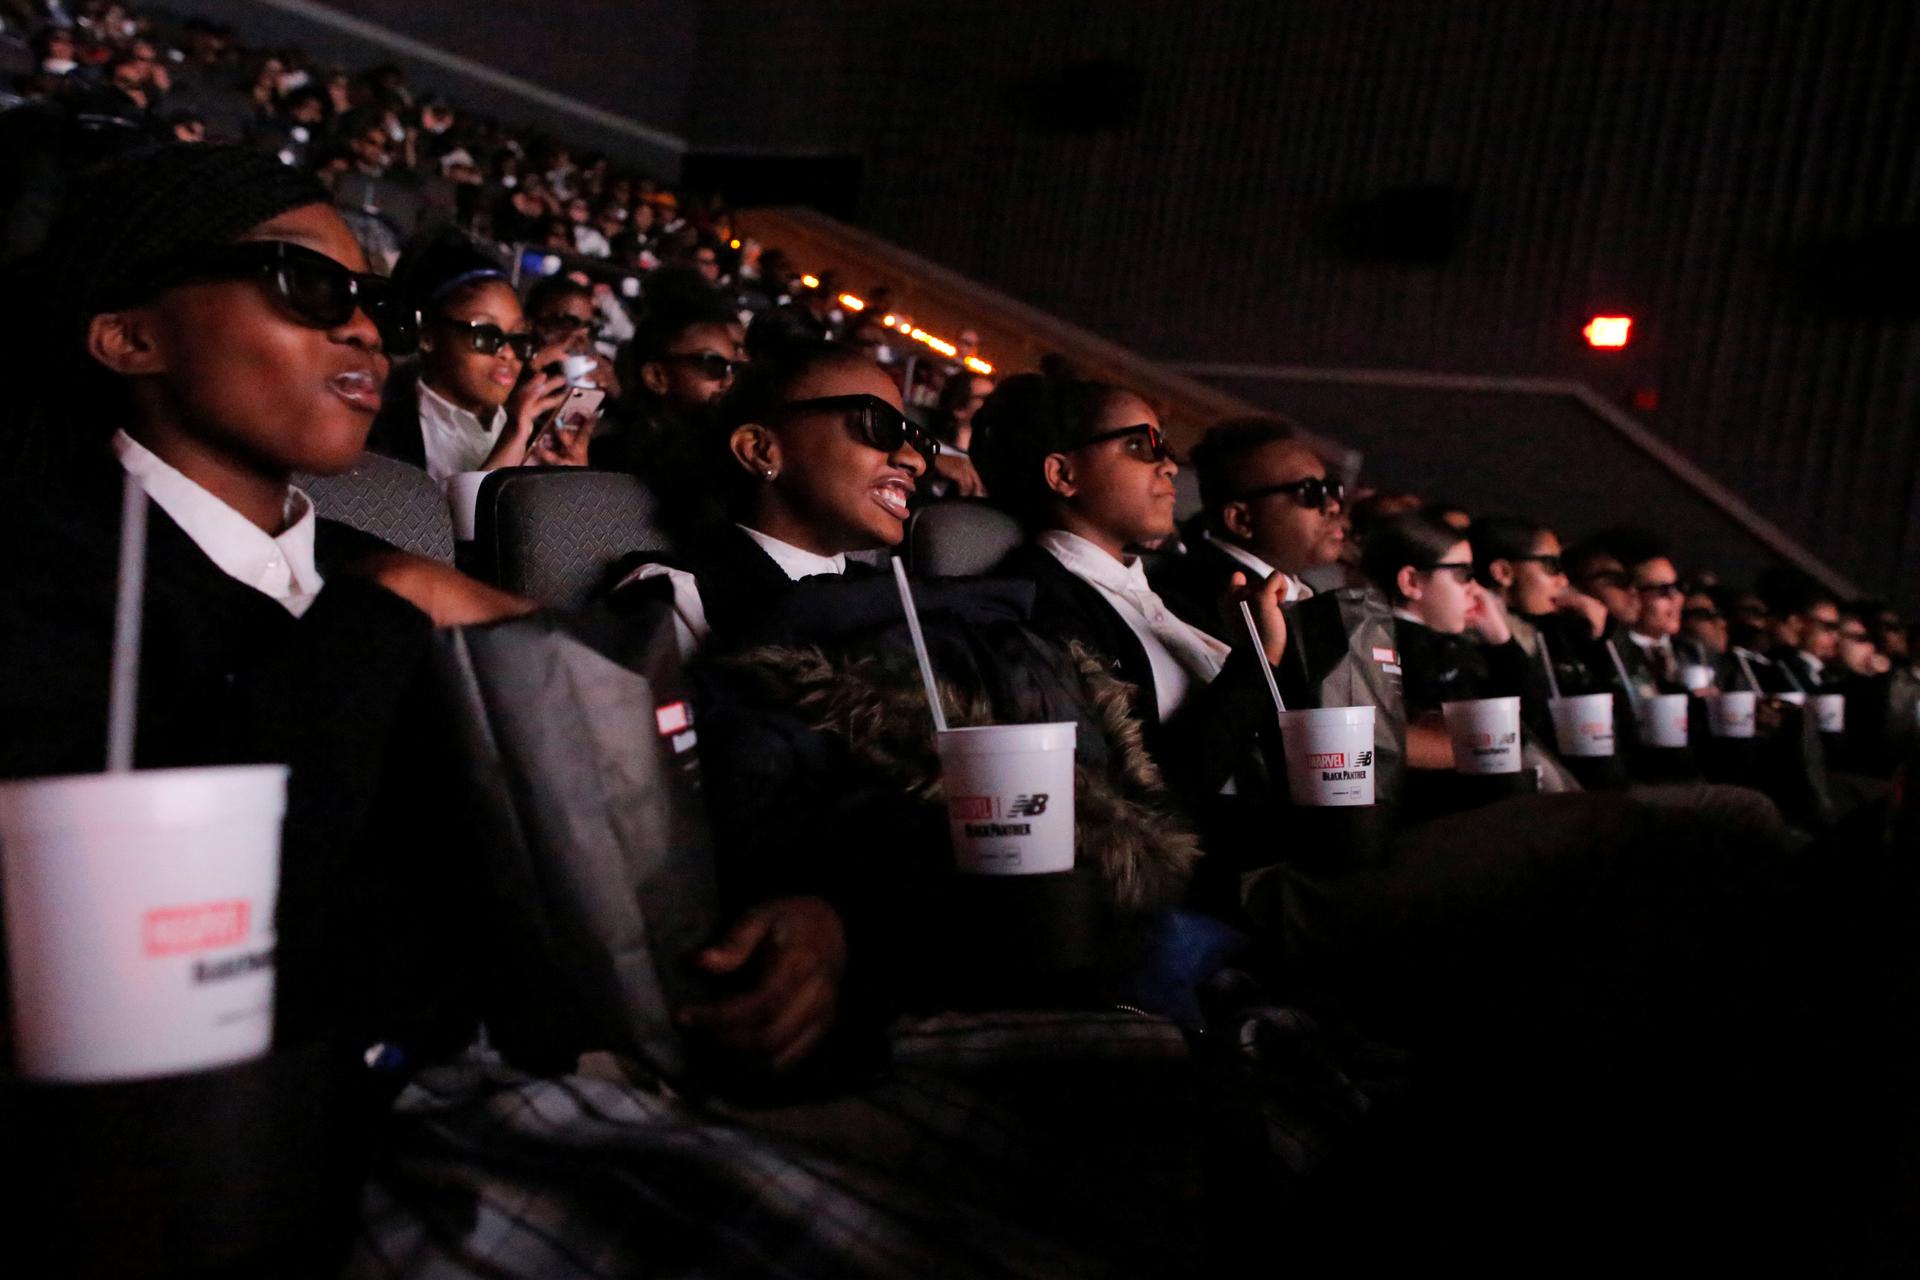 Students from the Capital Preparatory Harlem School watch a screening of the film "Black Panther" on its opening night.